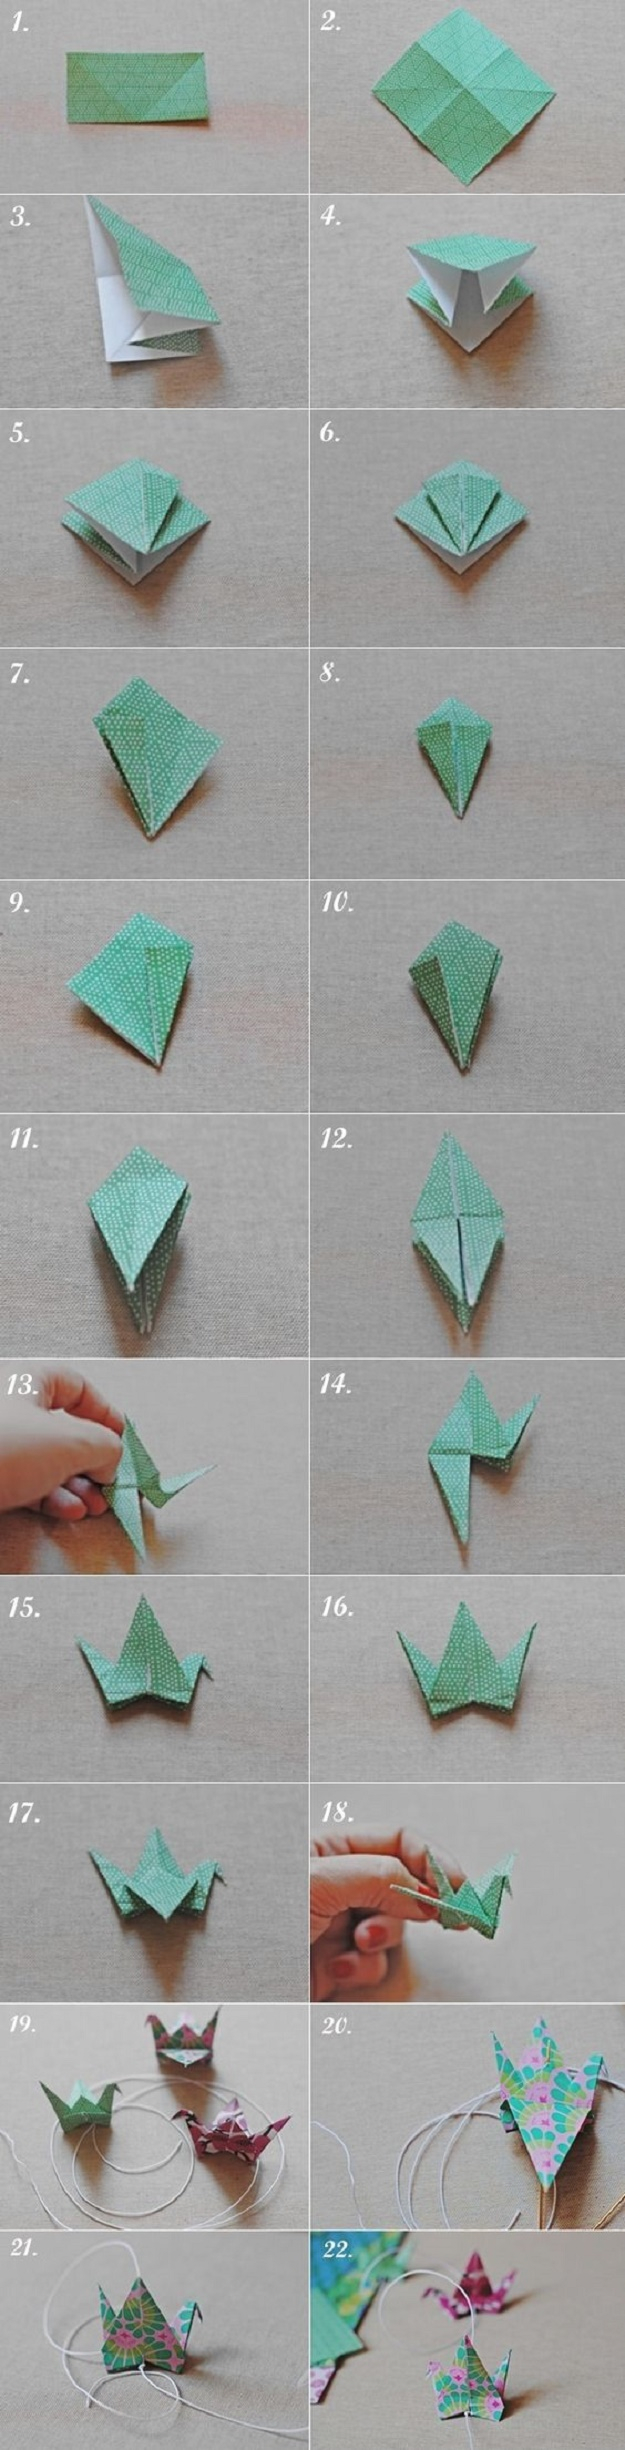 How To Make A Flower Origami Easy 40 Best Diy Origami Projects To Keep Your Entertained Today